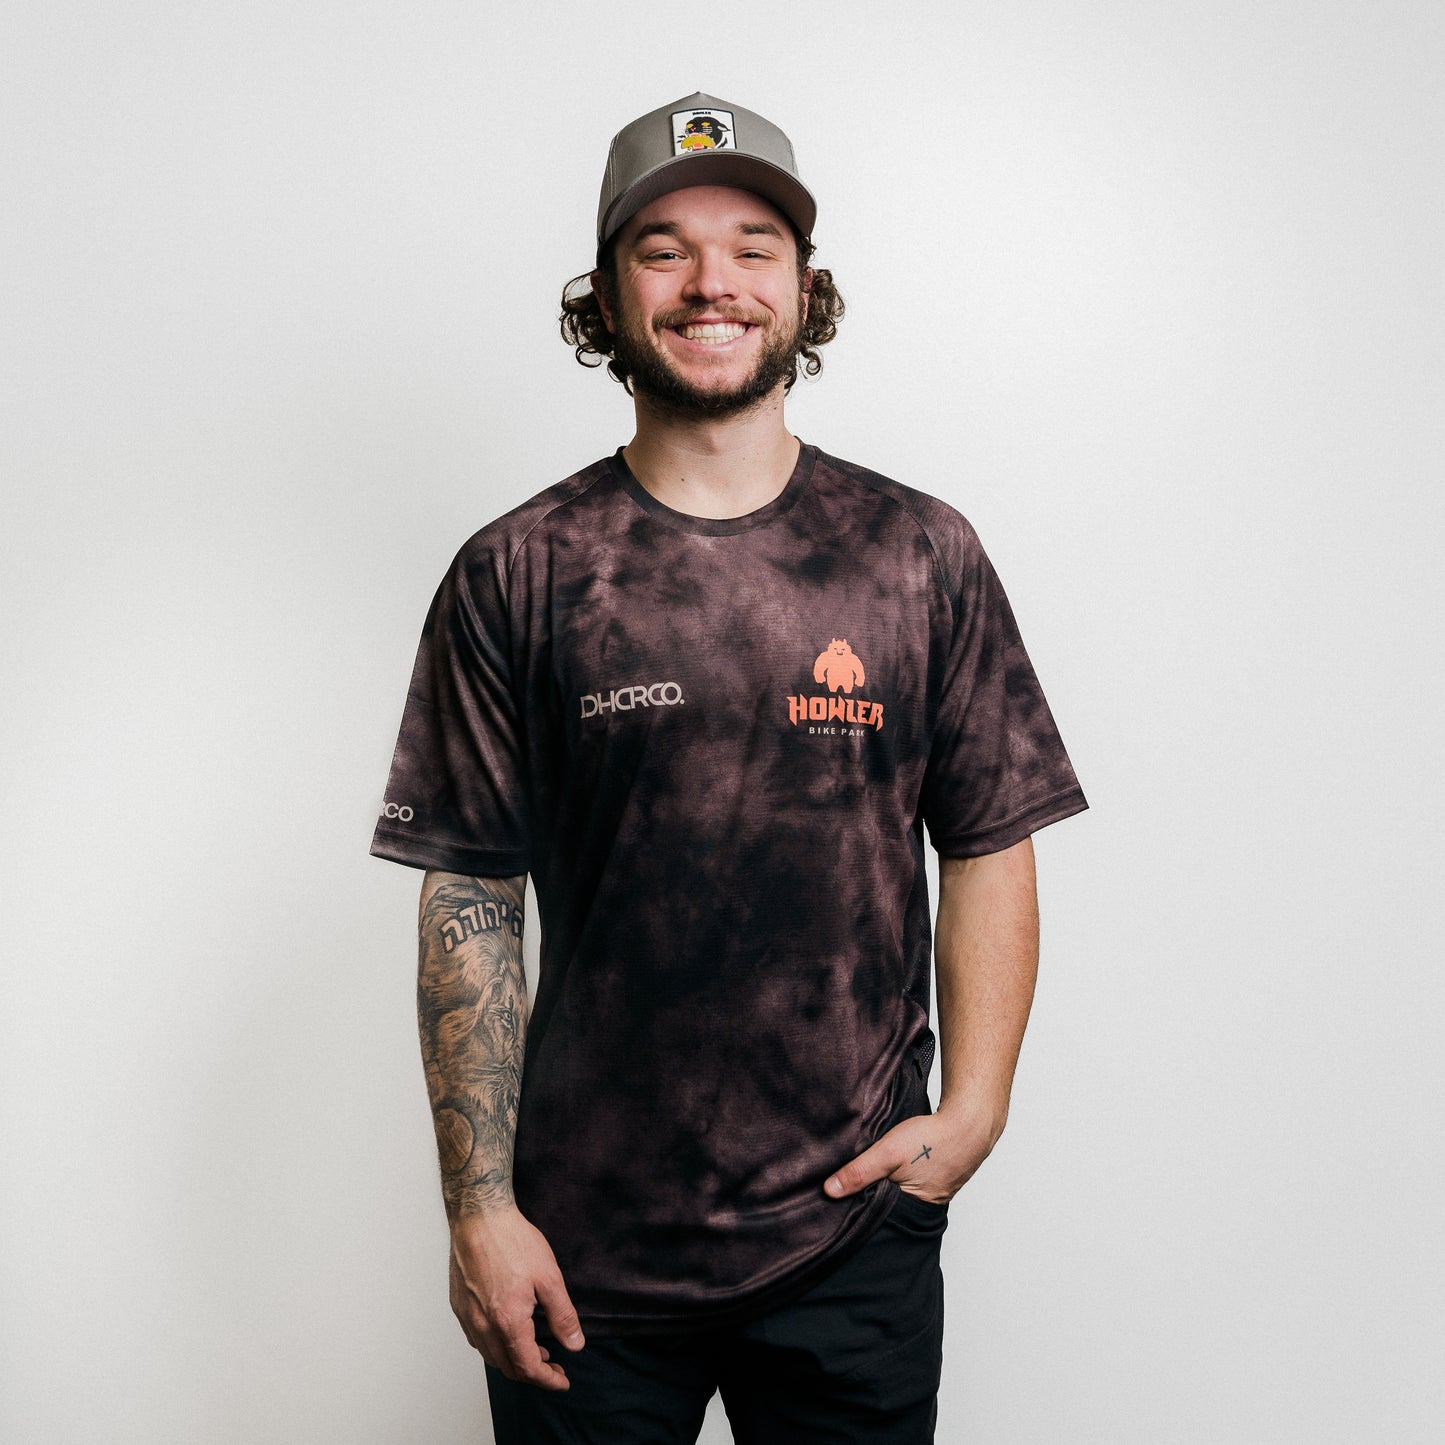 Howler Bike Park Limited Edition Dharco Short-Sleeve Jersey